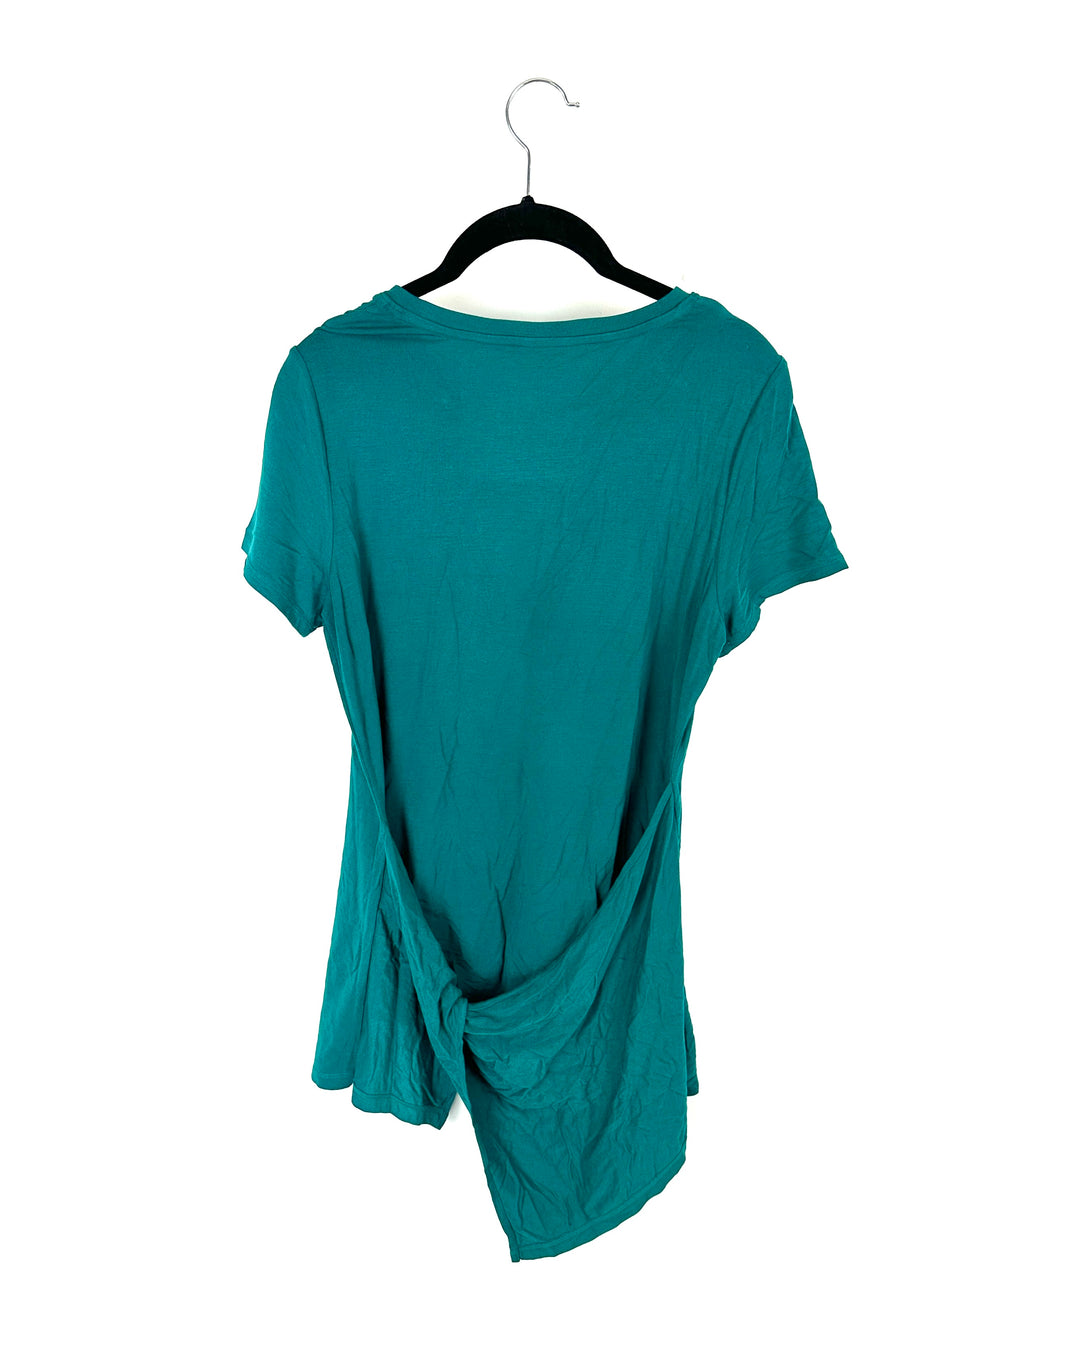 Teal Top - Size 6-8